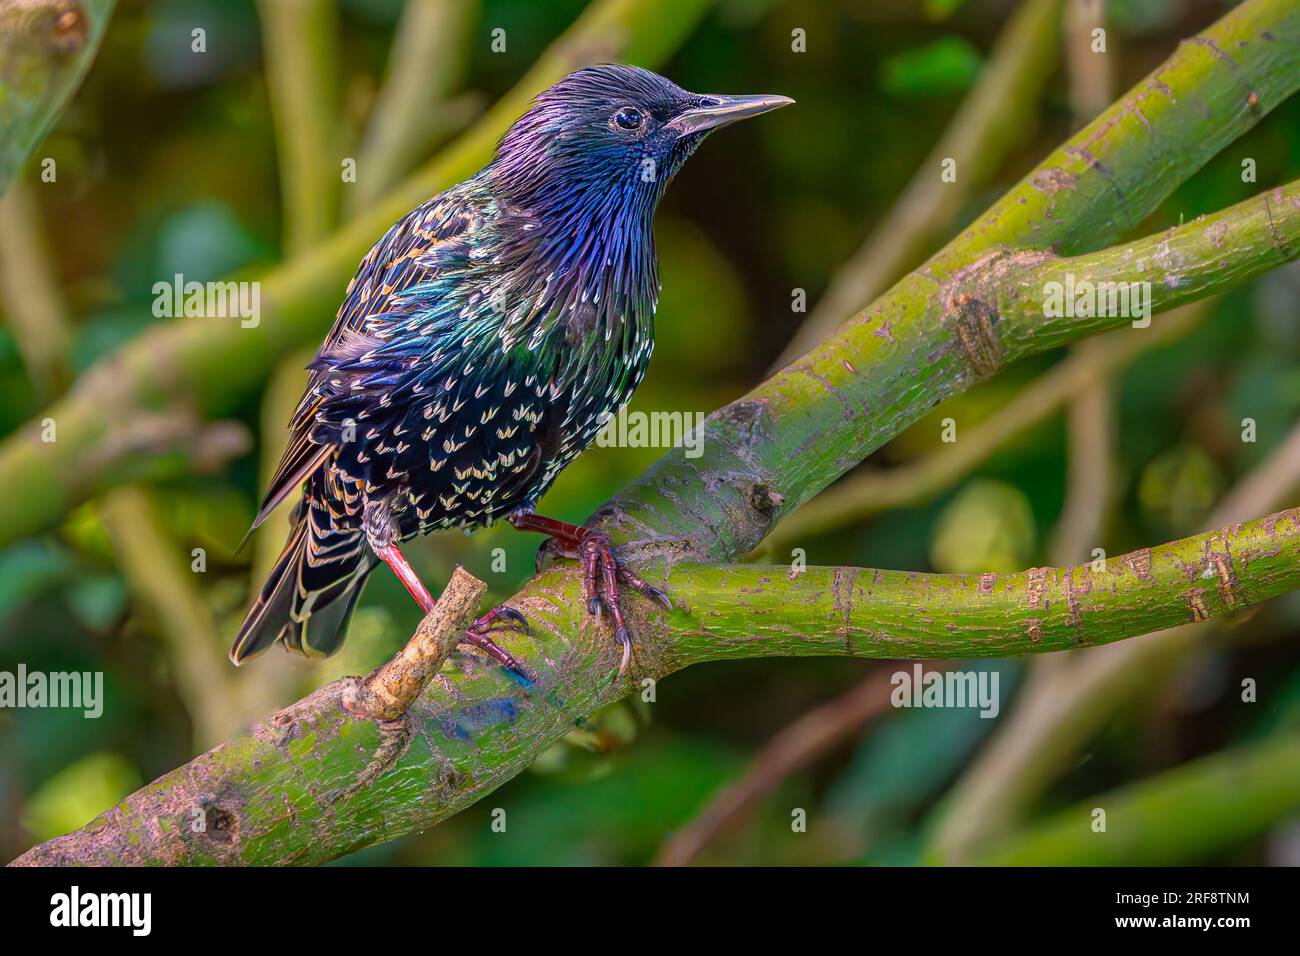 Starling sitting on a branch Stock Photo